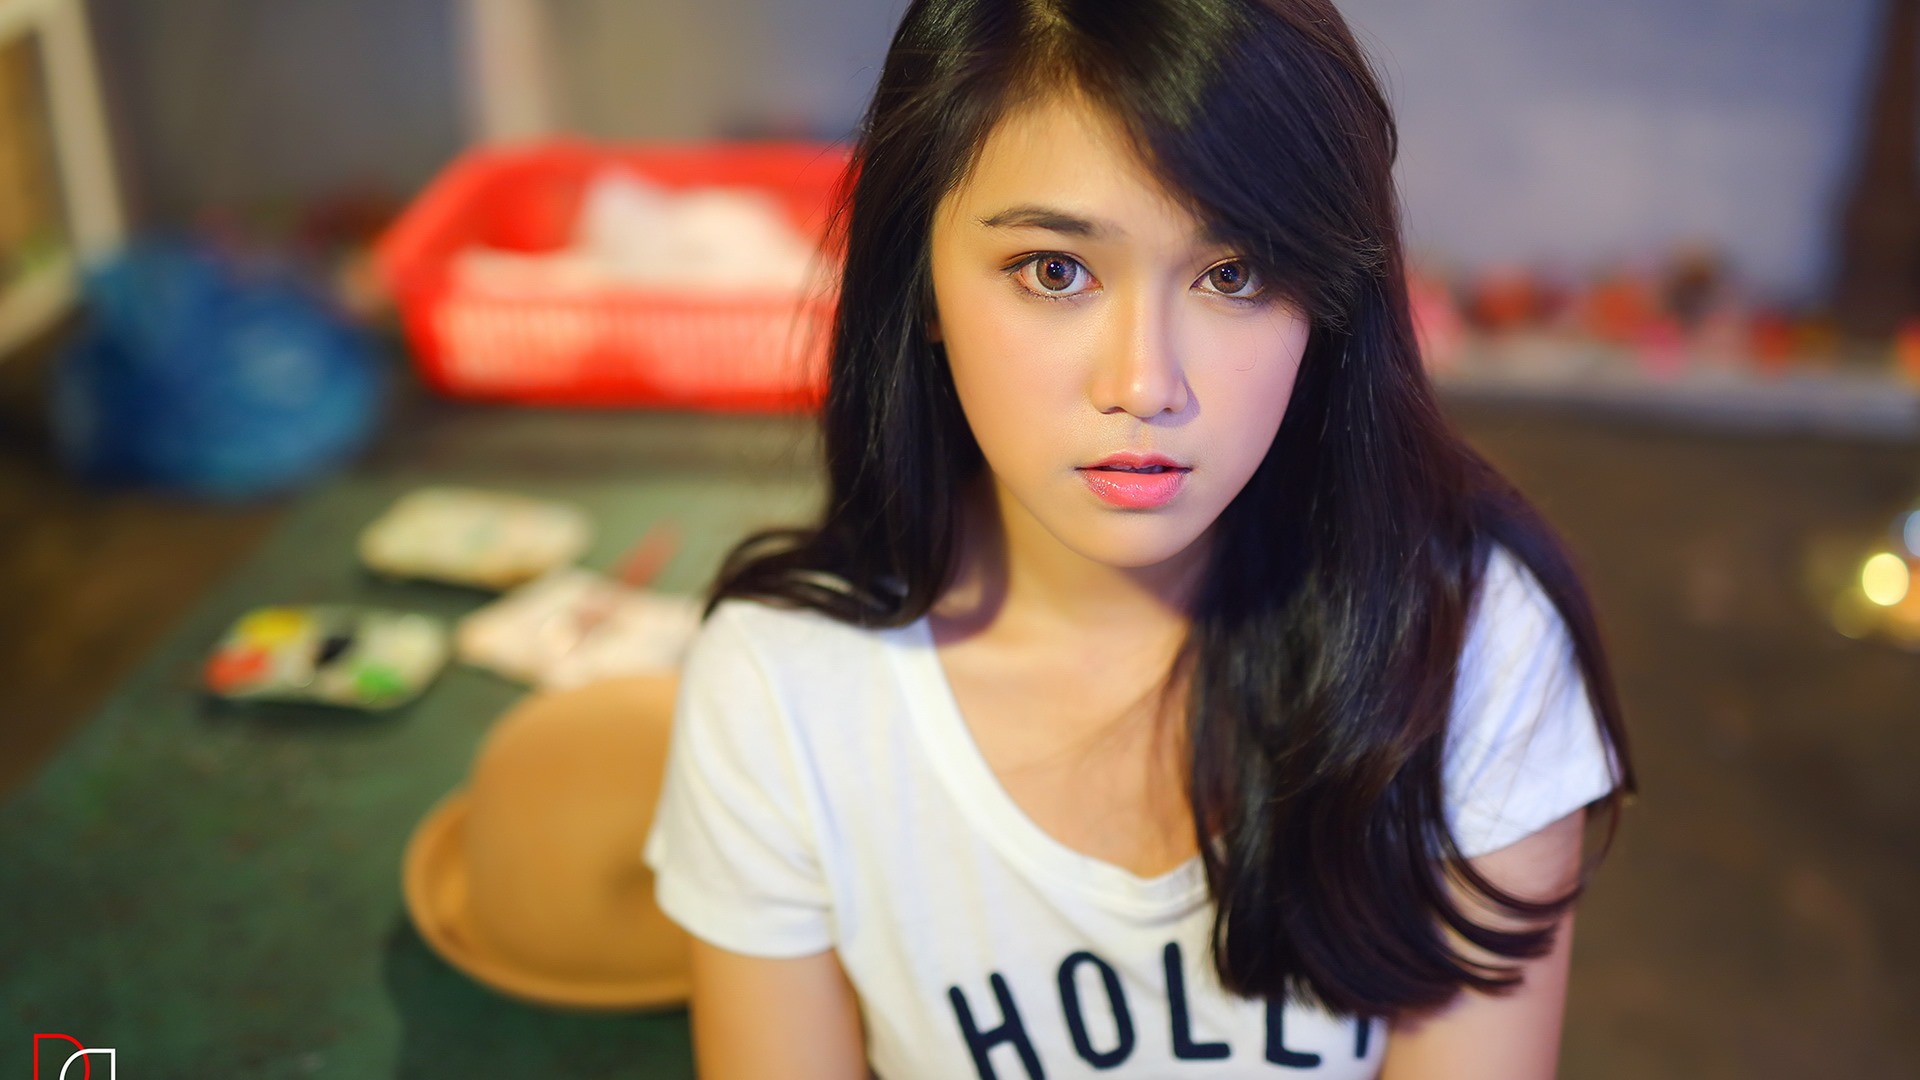 Pure and lovely young Asian girl HD wallpapers collection (3) #40 - 1920x1080